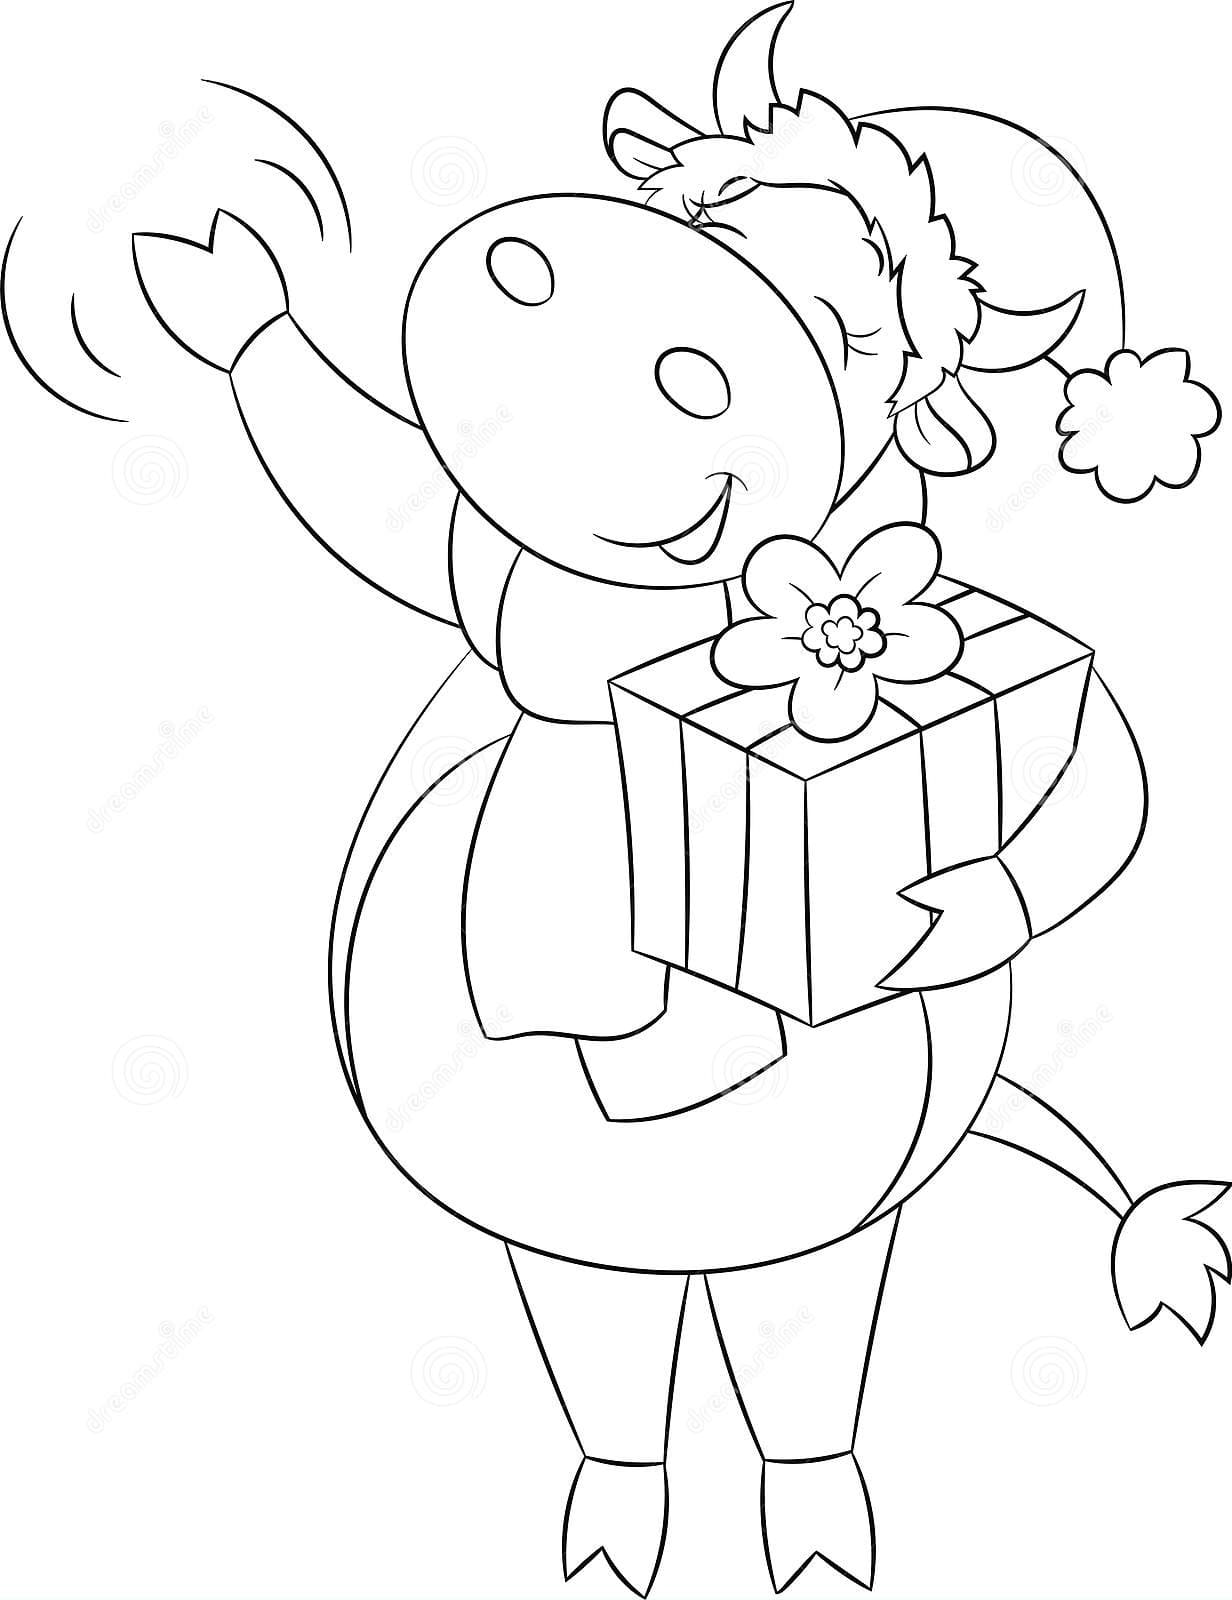 Cute Black And White Of A Cow Coloring Page